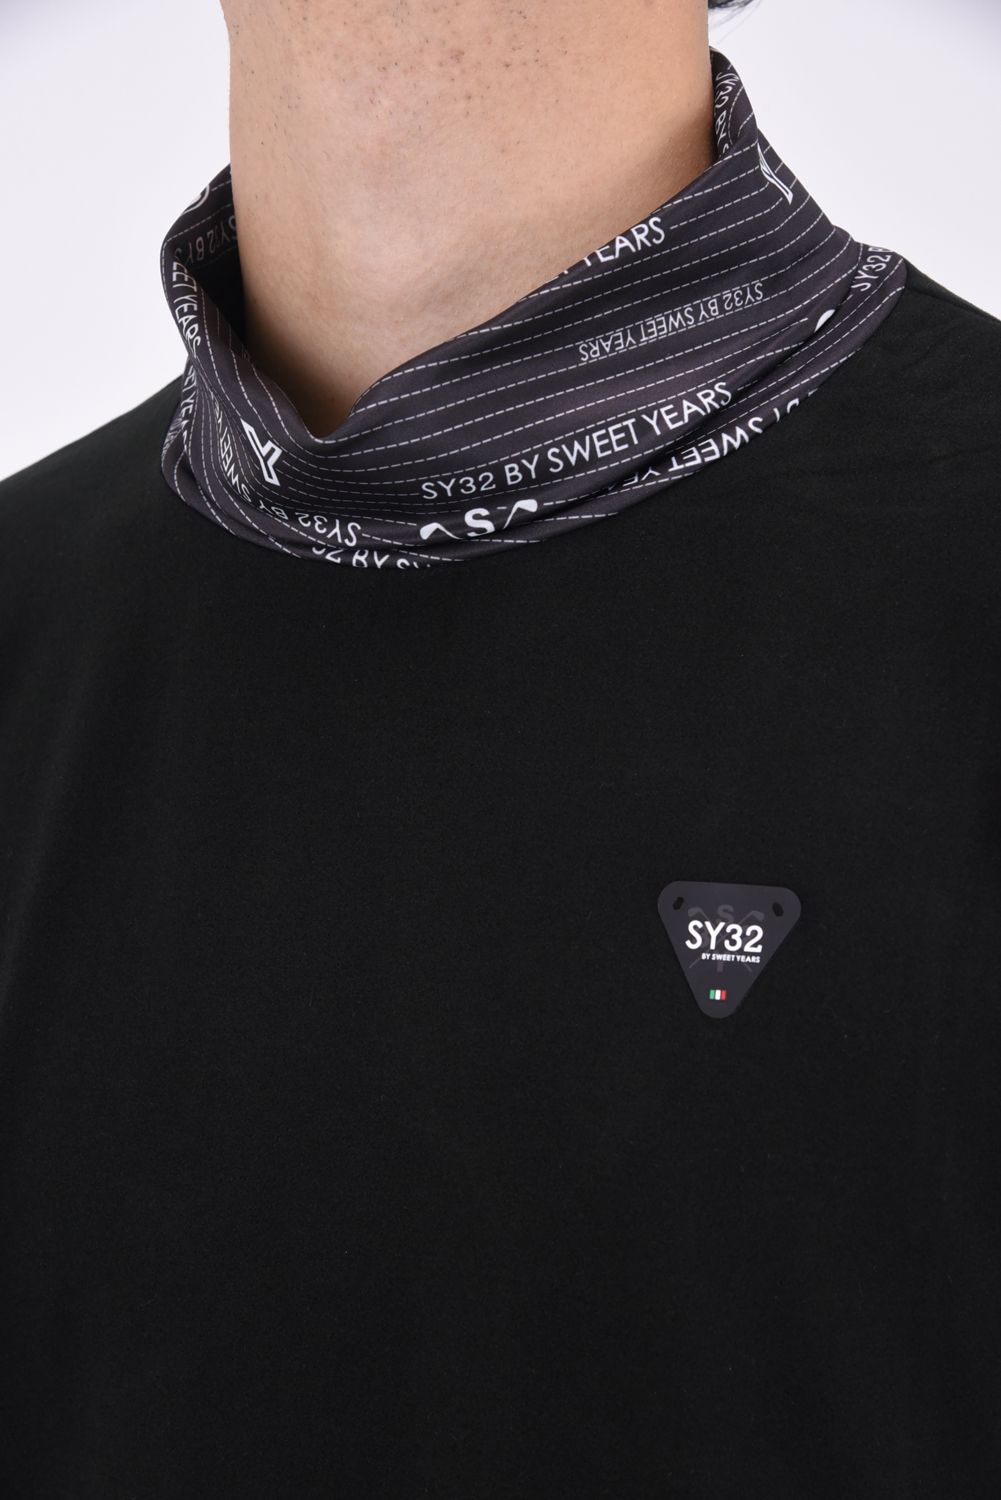 SY32 by SWEET YEARS GOLF - NECK GRAPHIC PREMIEREWARM SHIRTS / ロゴ